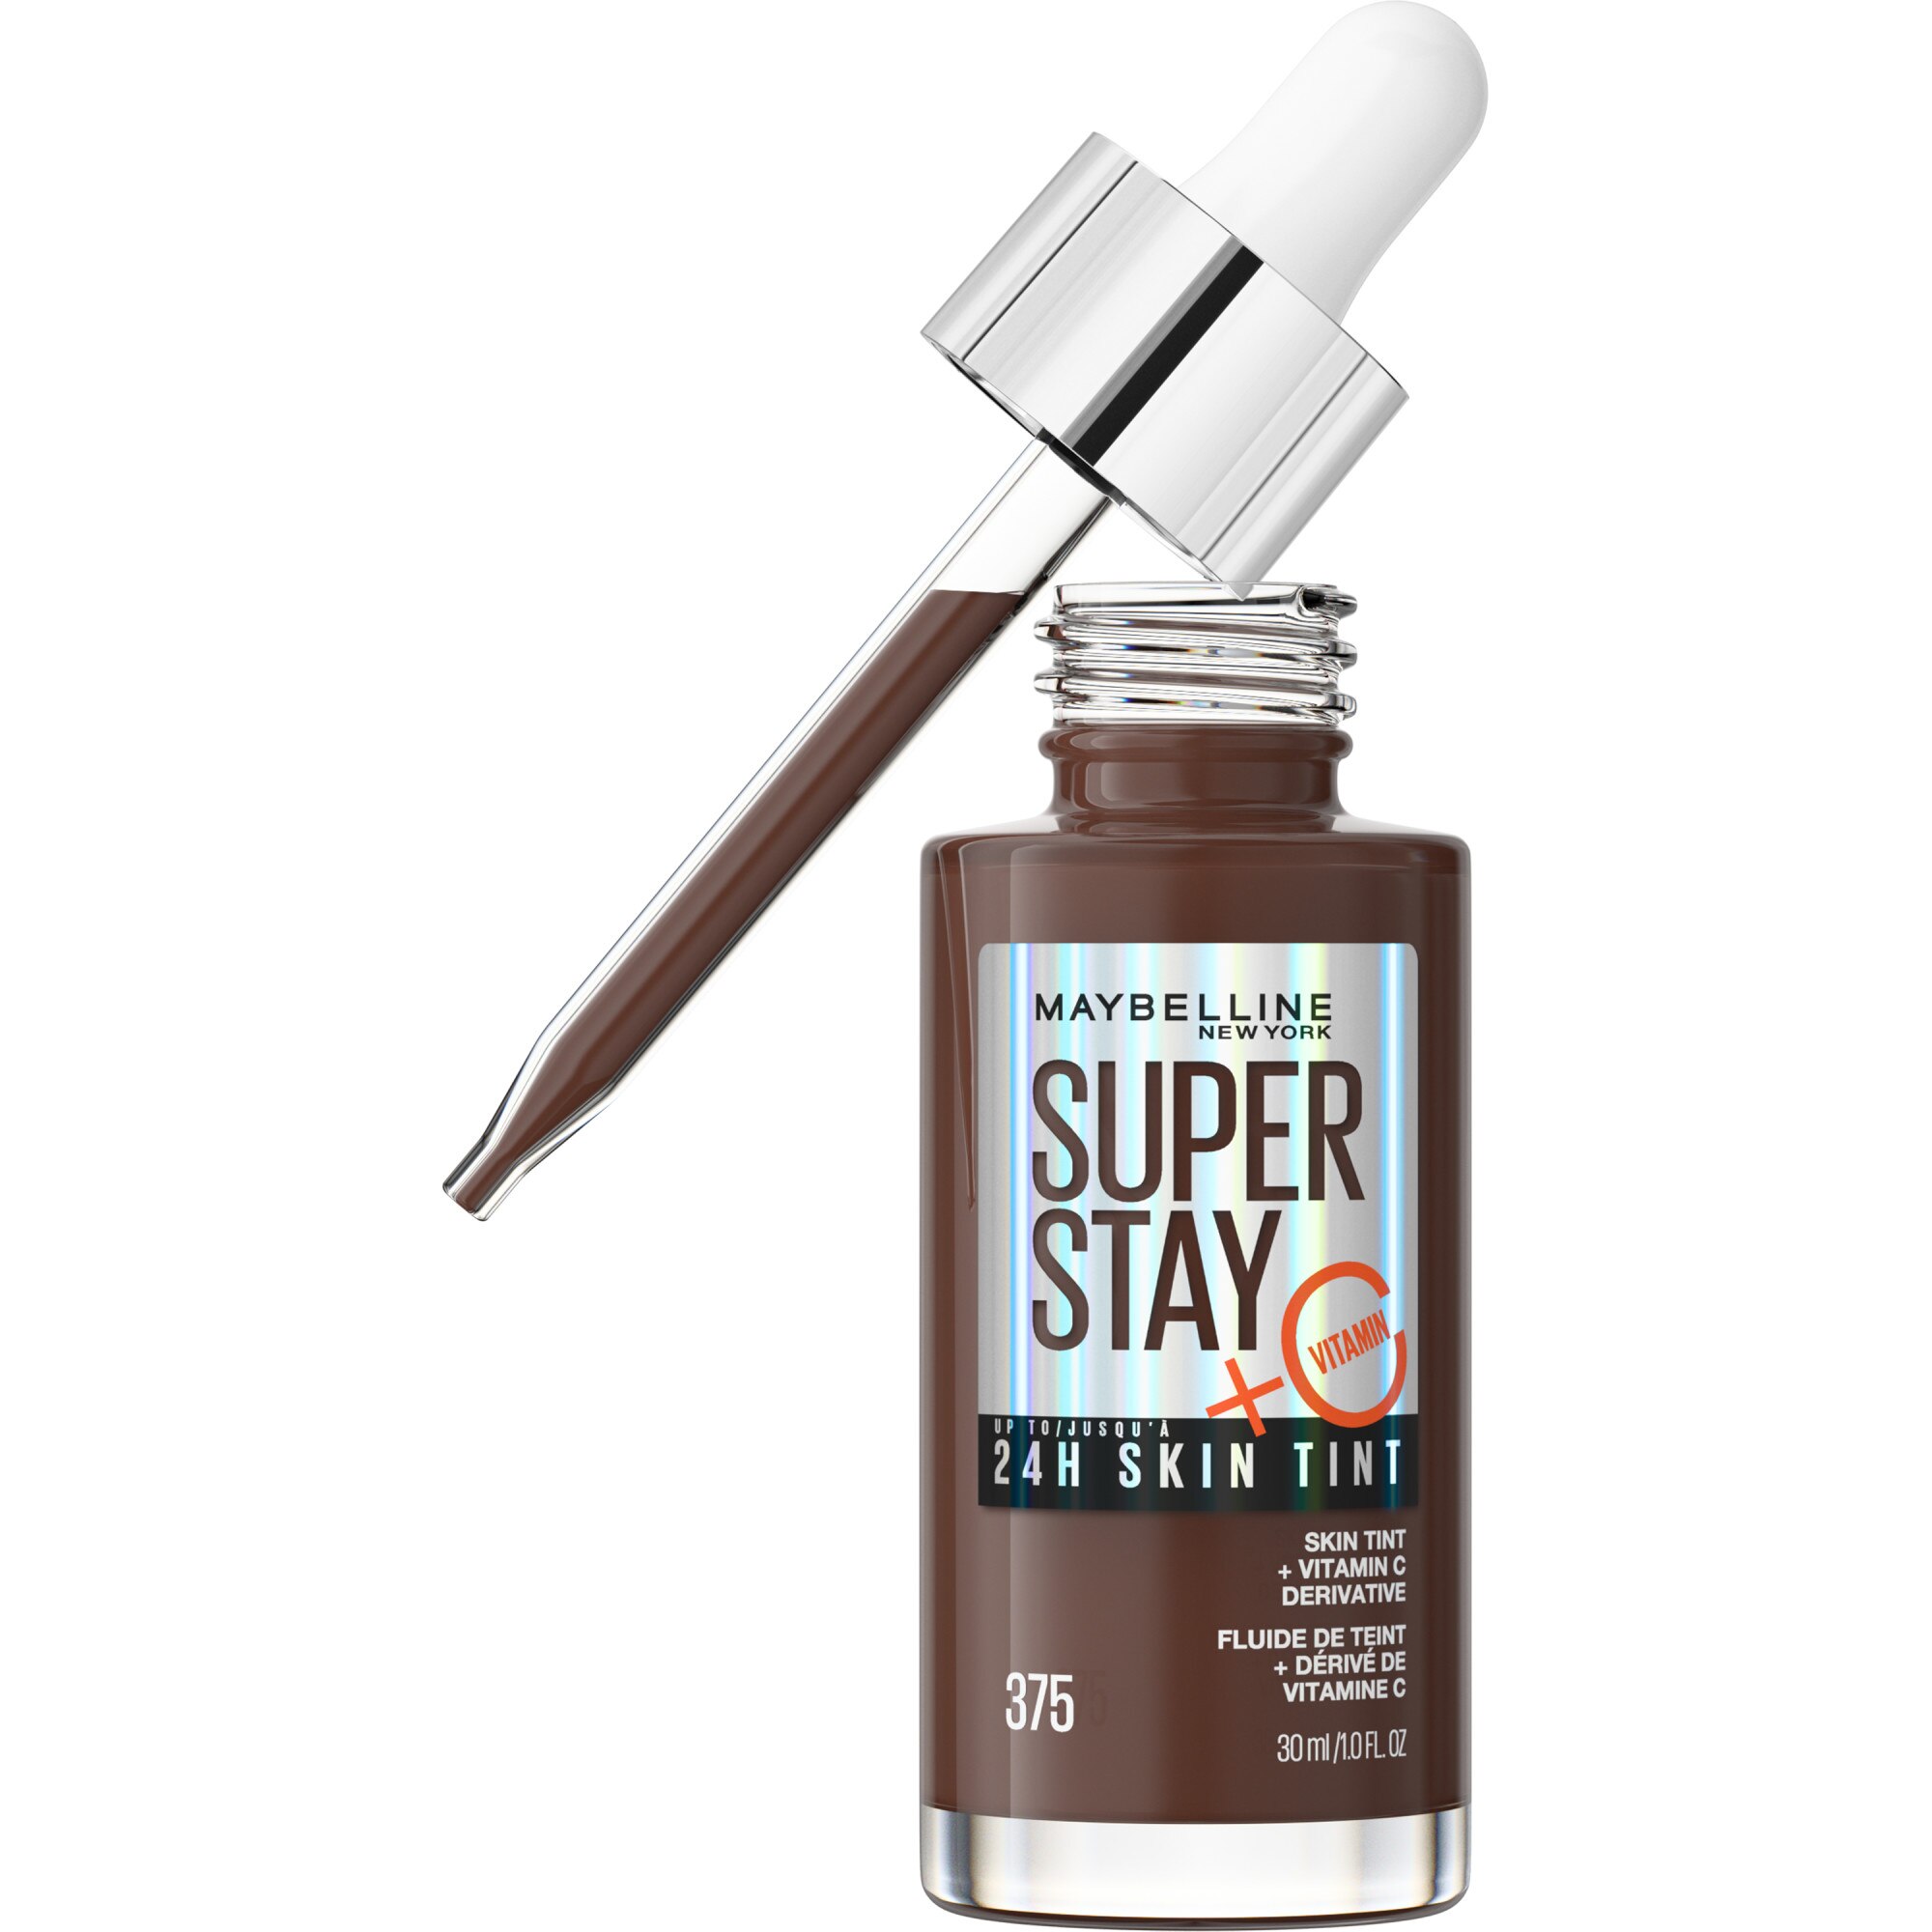 Maybelline New York Super Stay Up To 24HR Skin Tint With Vitamin C, 375, 1 Oz , CVS